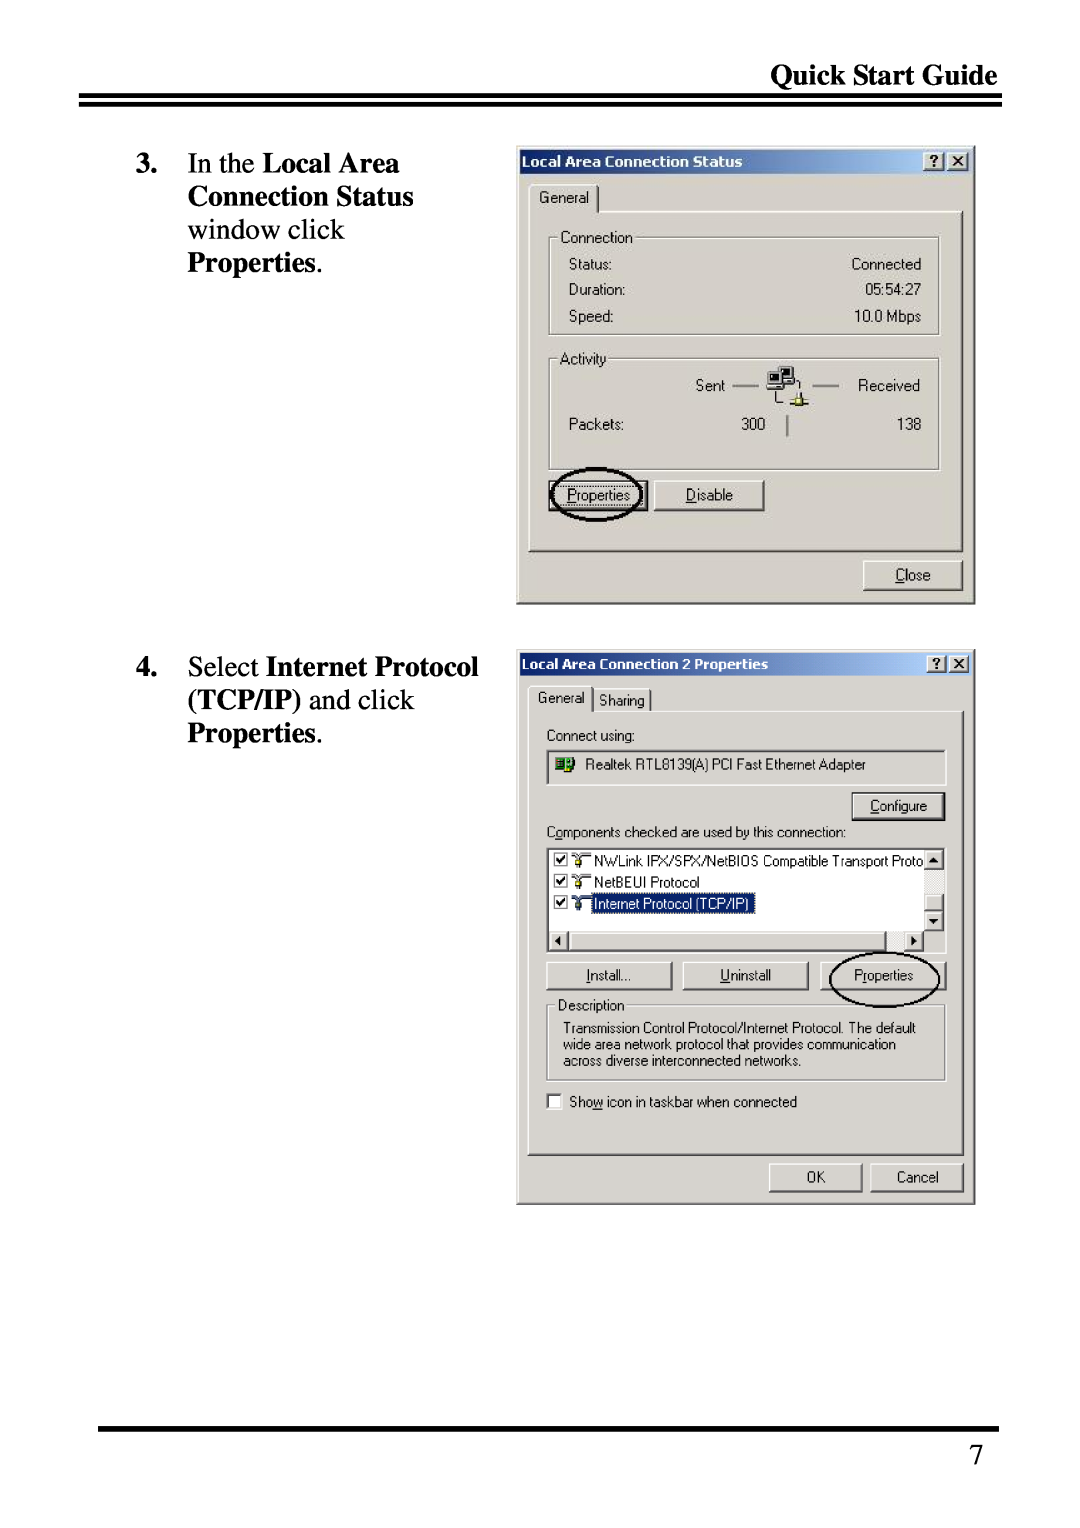 Billion Electric Company BIPAC-645 Quick Start Guide 3. In the Local Area, Connection Status window click Properties 